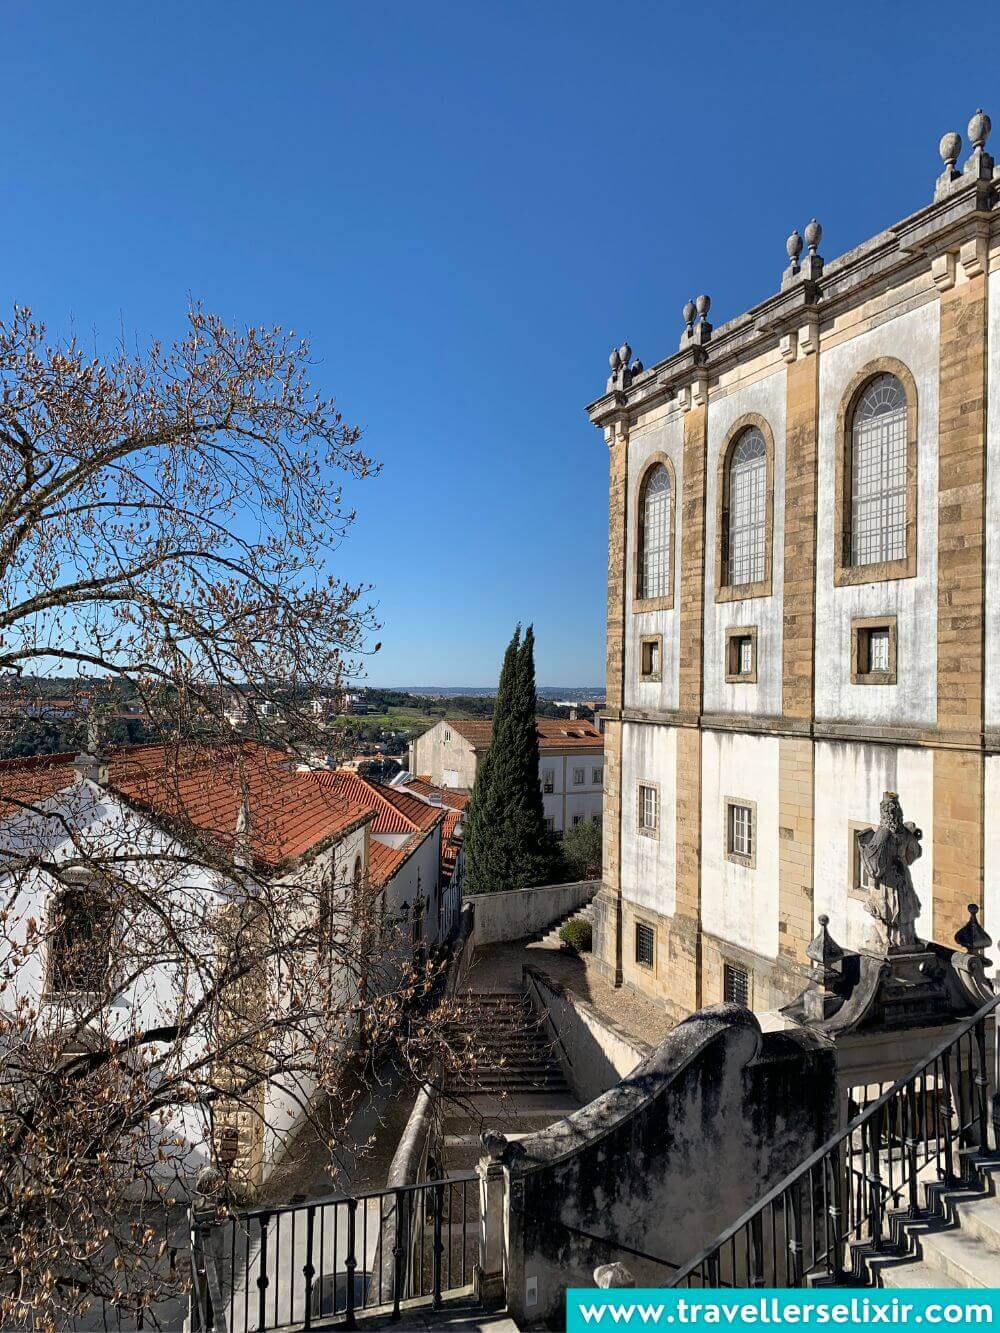 View from the University of Coimbra in Alta.